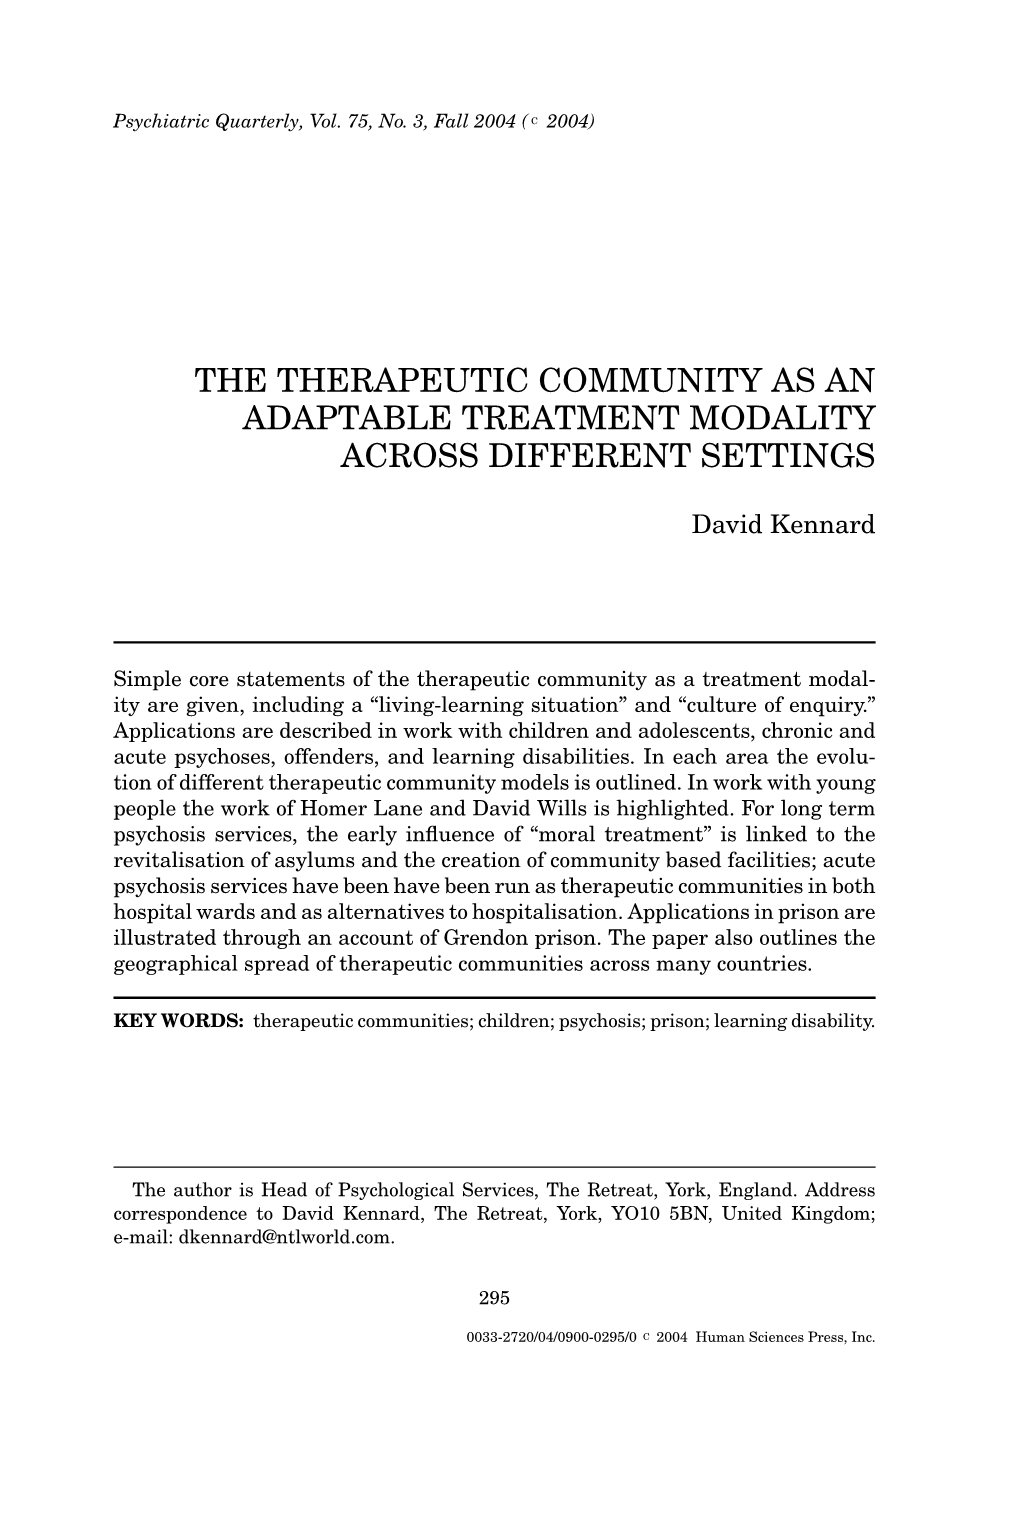 The Therapeutic Community As an Adaptable Treatment Modality Across Different Settings